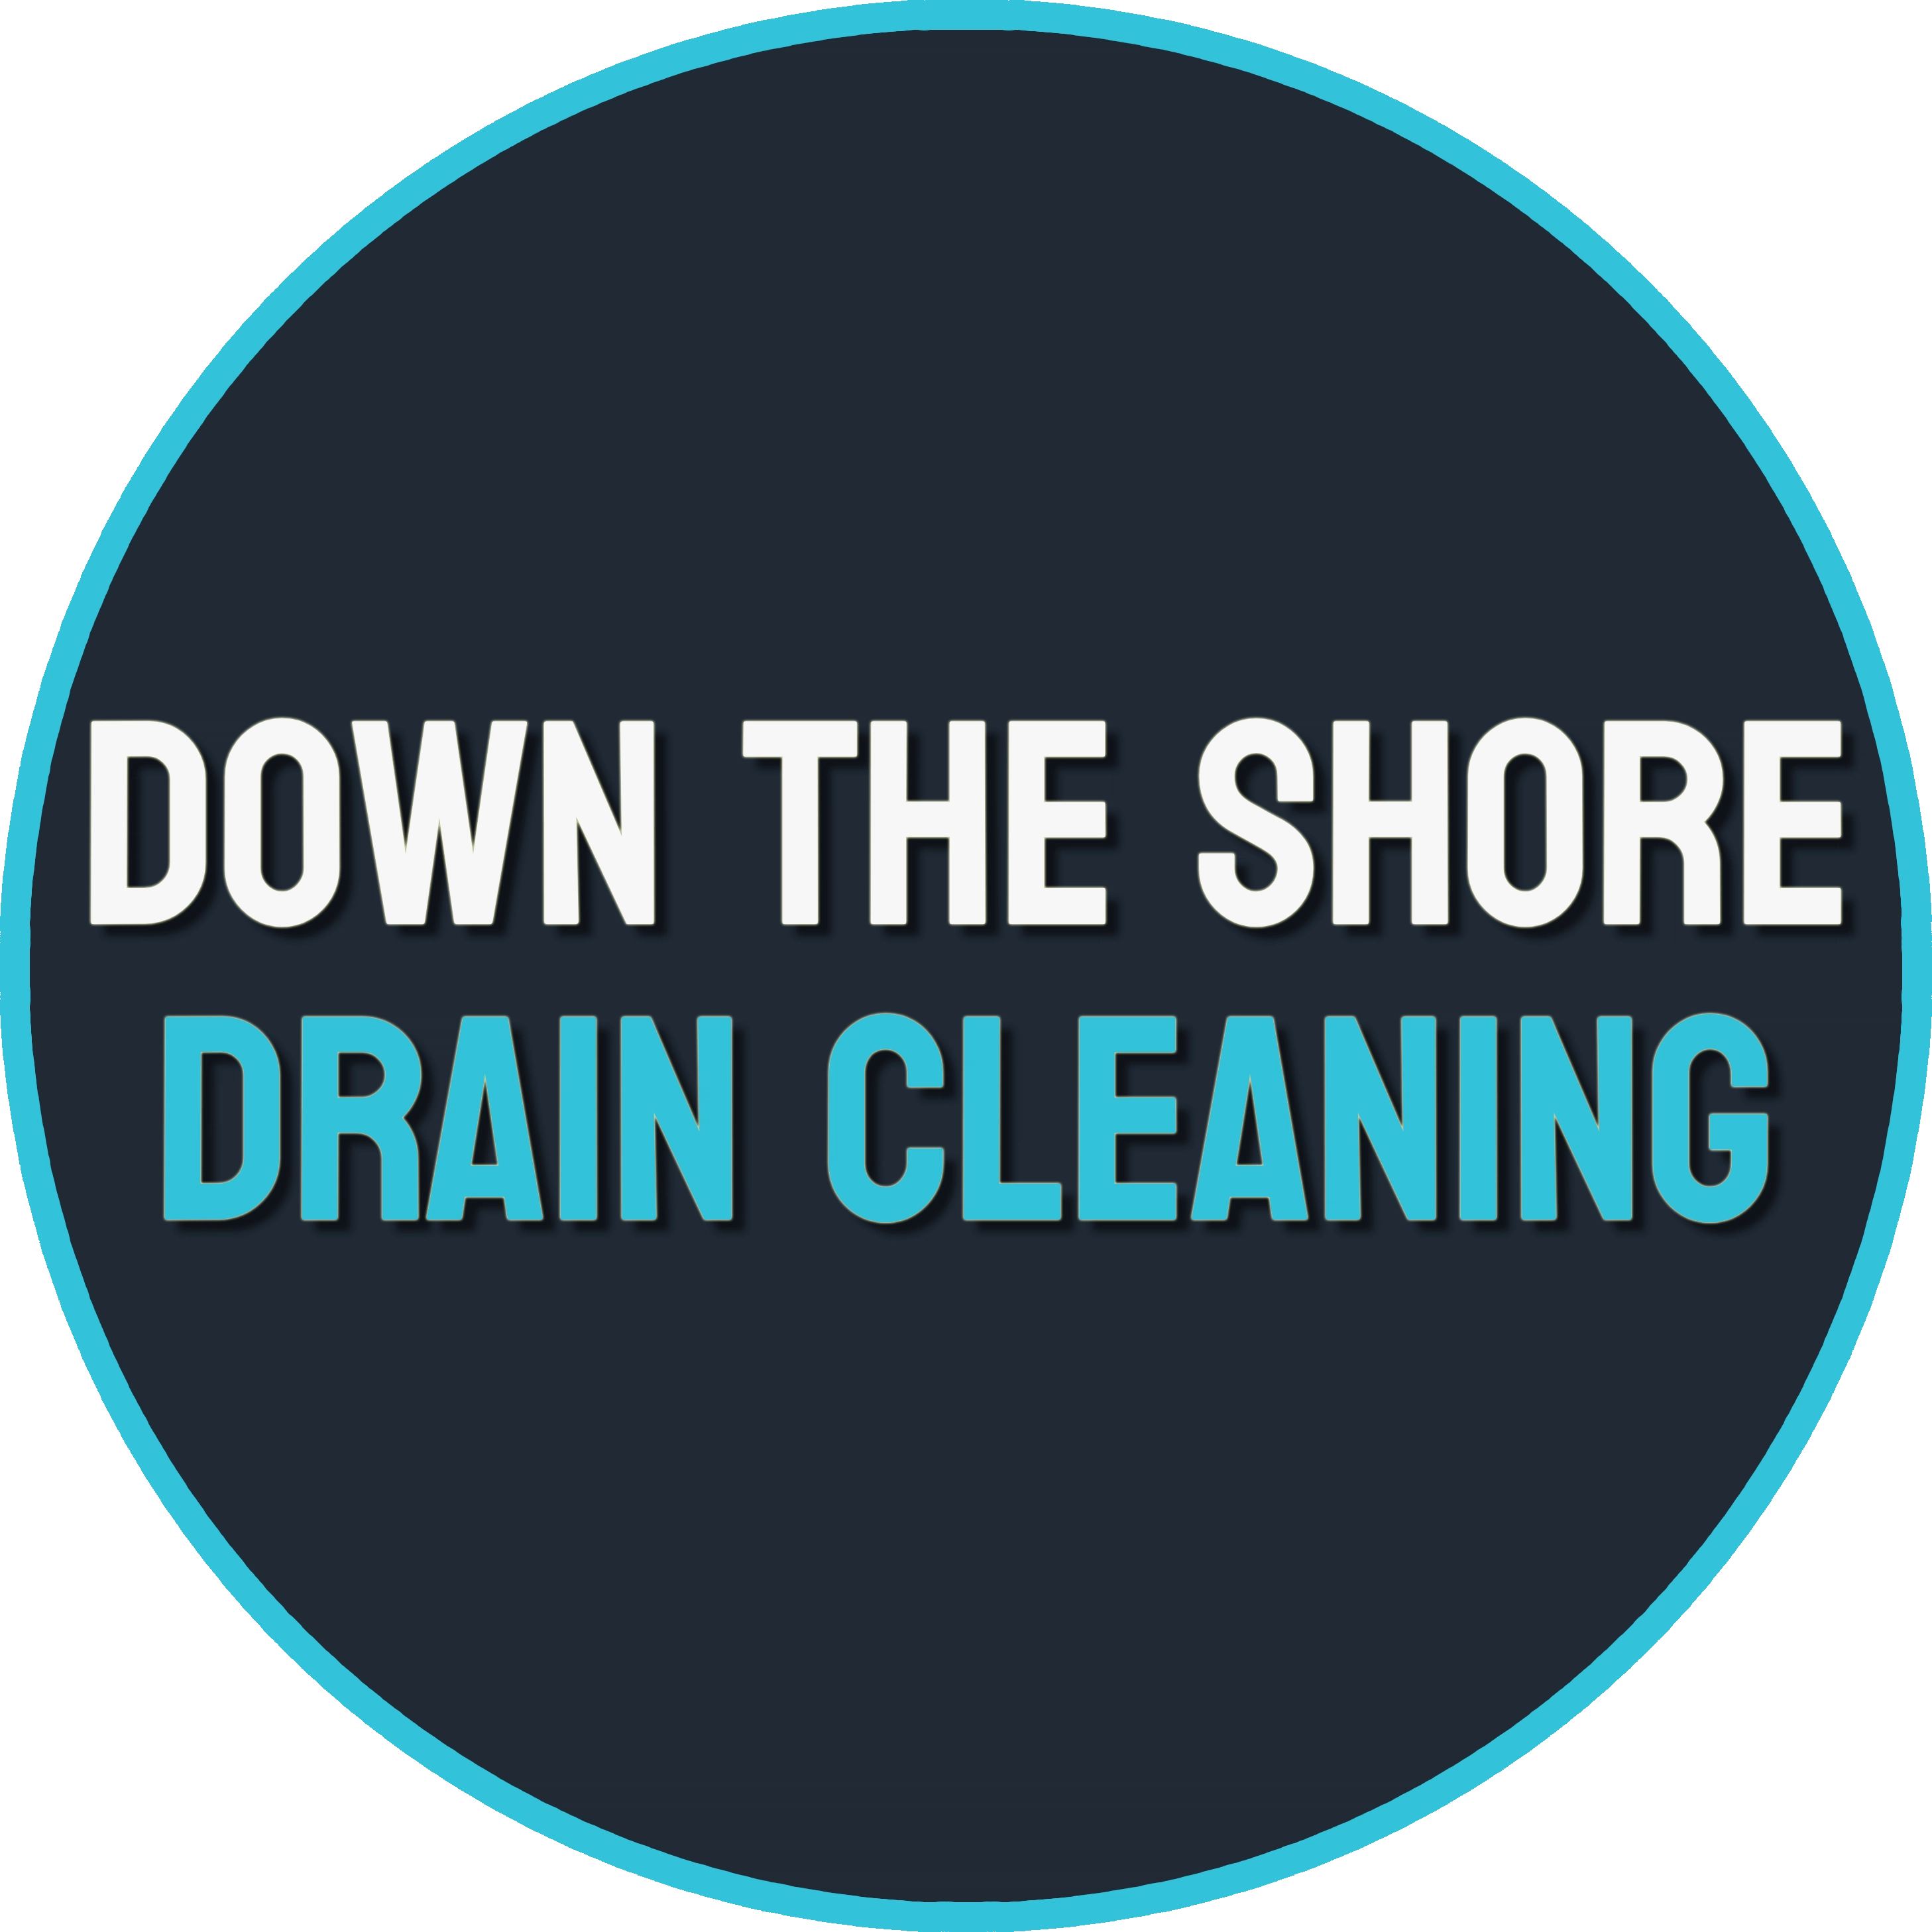 Down The Shore Drain Cleaning Logo